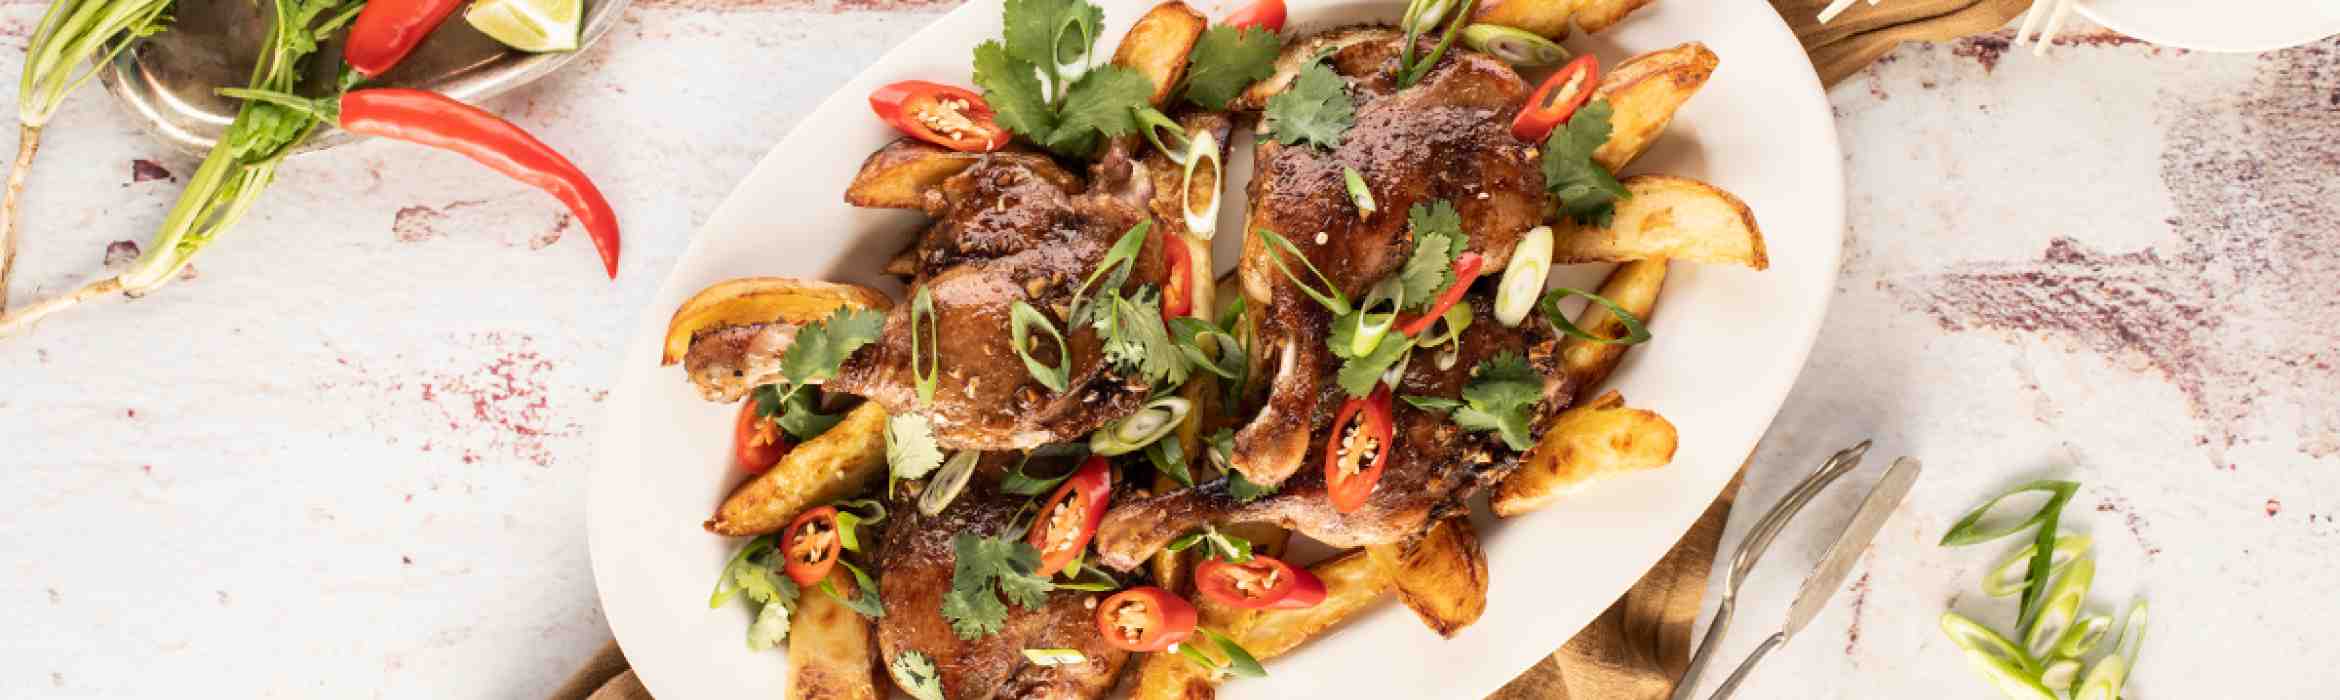 Chinese Style Braised Duck Legs with Crispy Potatoes Recipe